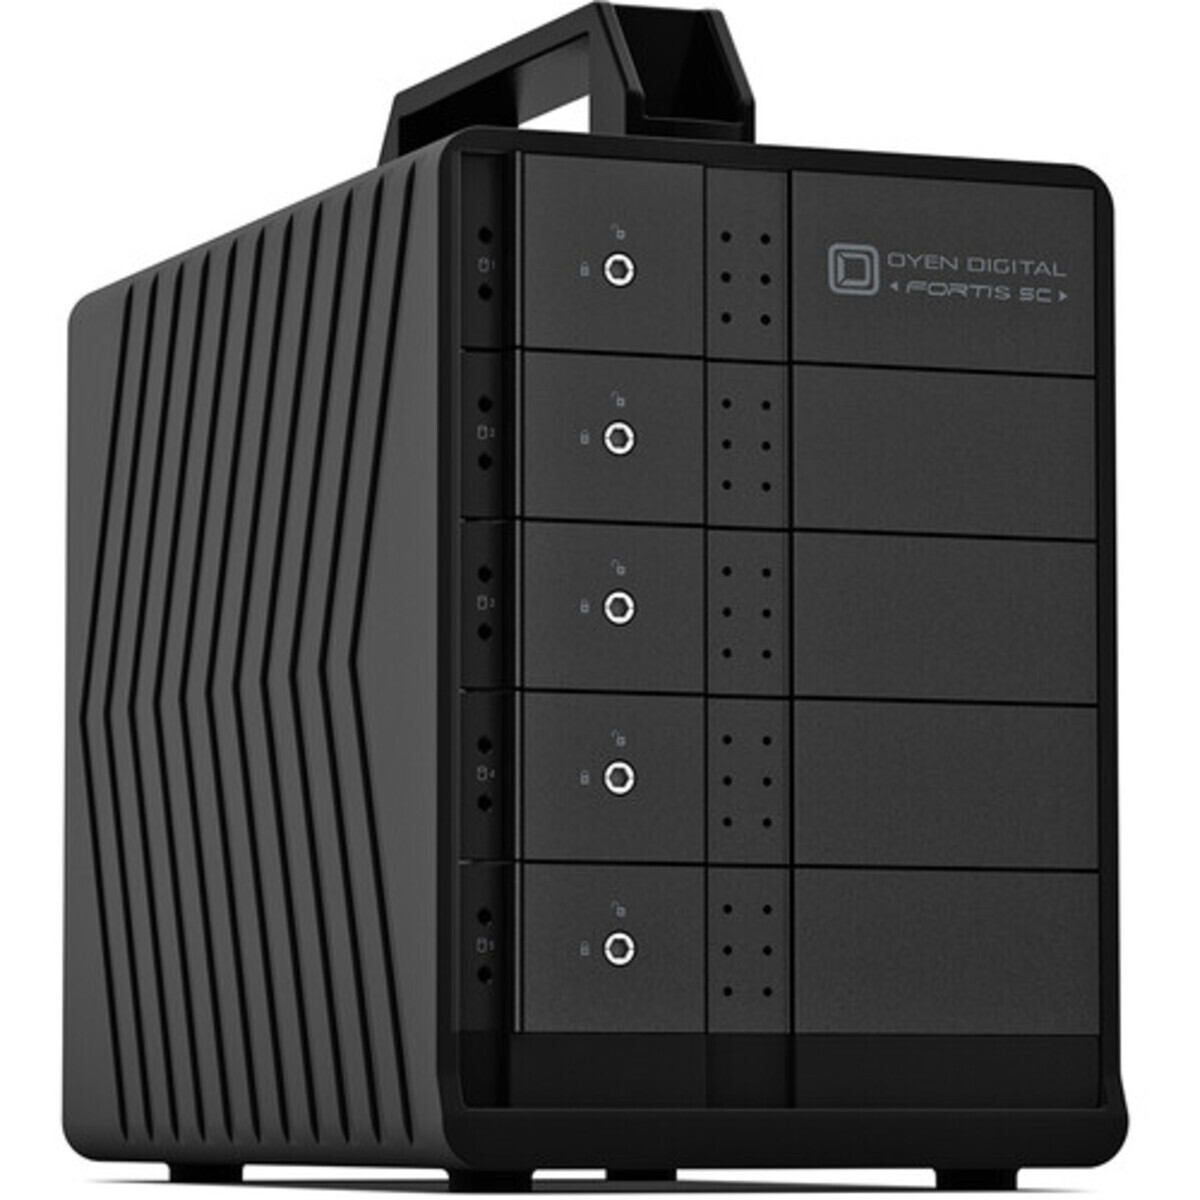 buy OYEN Fortis 5C 110tb Desktop DAS - Direct Attached Storage Device 5x22000gb Seagate IronWolf Pro ST22000NT001 3.5 7200rpm SATA 6Gb/s HDD NAS Class Drives Installed - Burn-In Tested - ON SALE - nas headquarters buy network attached storage server device das new raid-5 free shipping simply usa christmas holiday black friday cyber monday week sale happening now! Fortis 5C